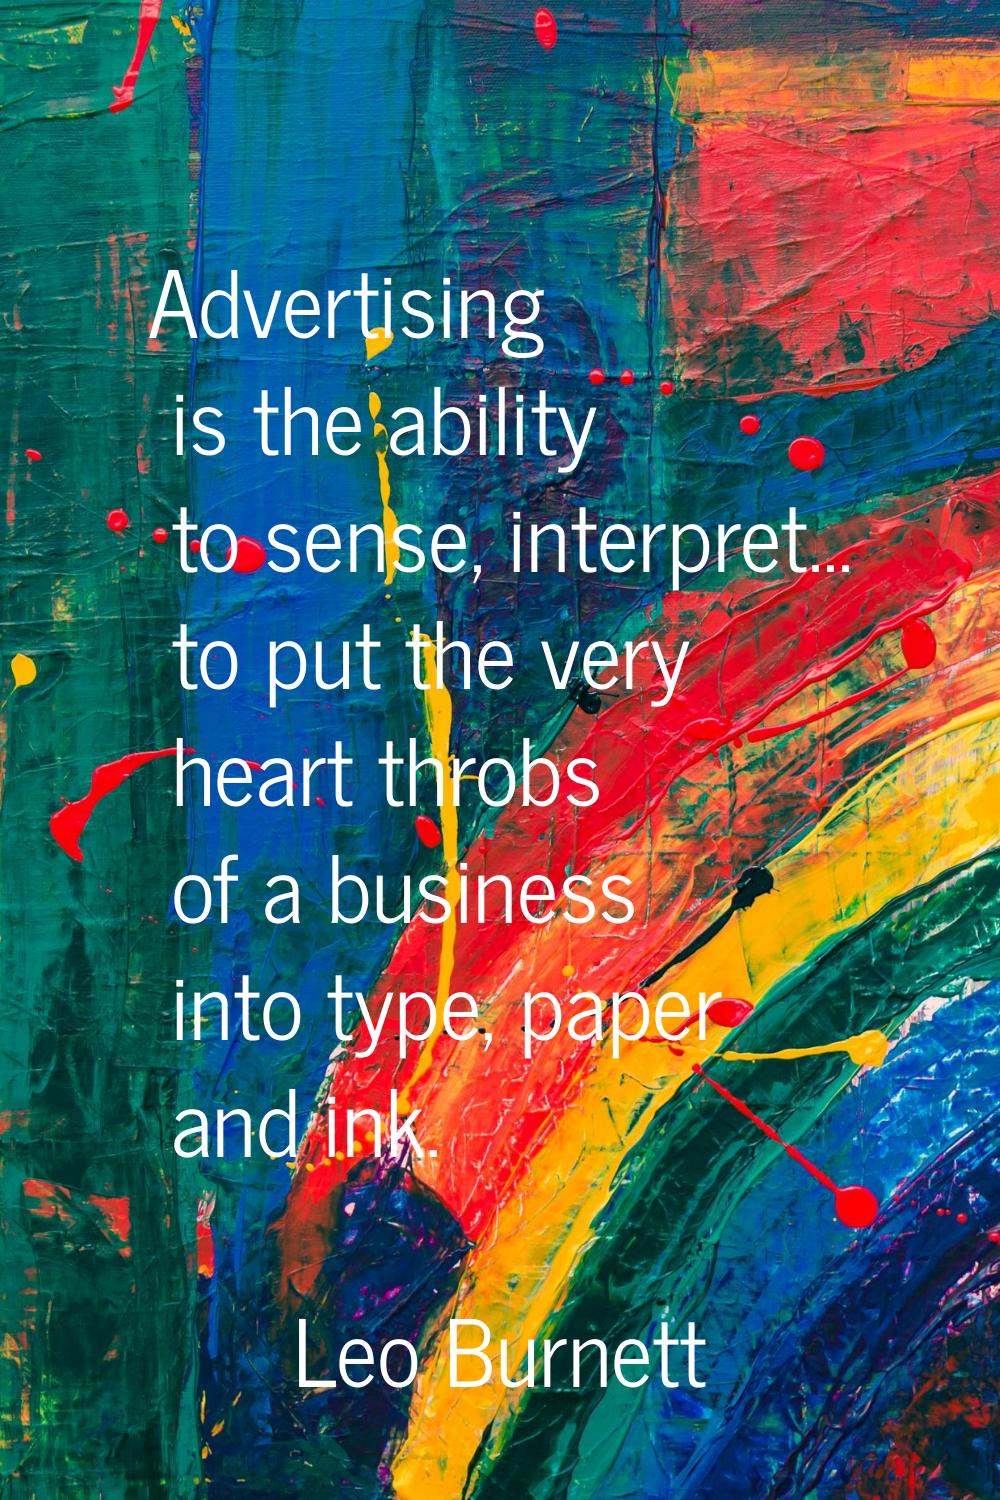 Advertising is the ability to sense, interpret... to put the very heart throbs of a business into t